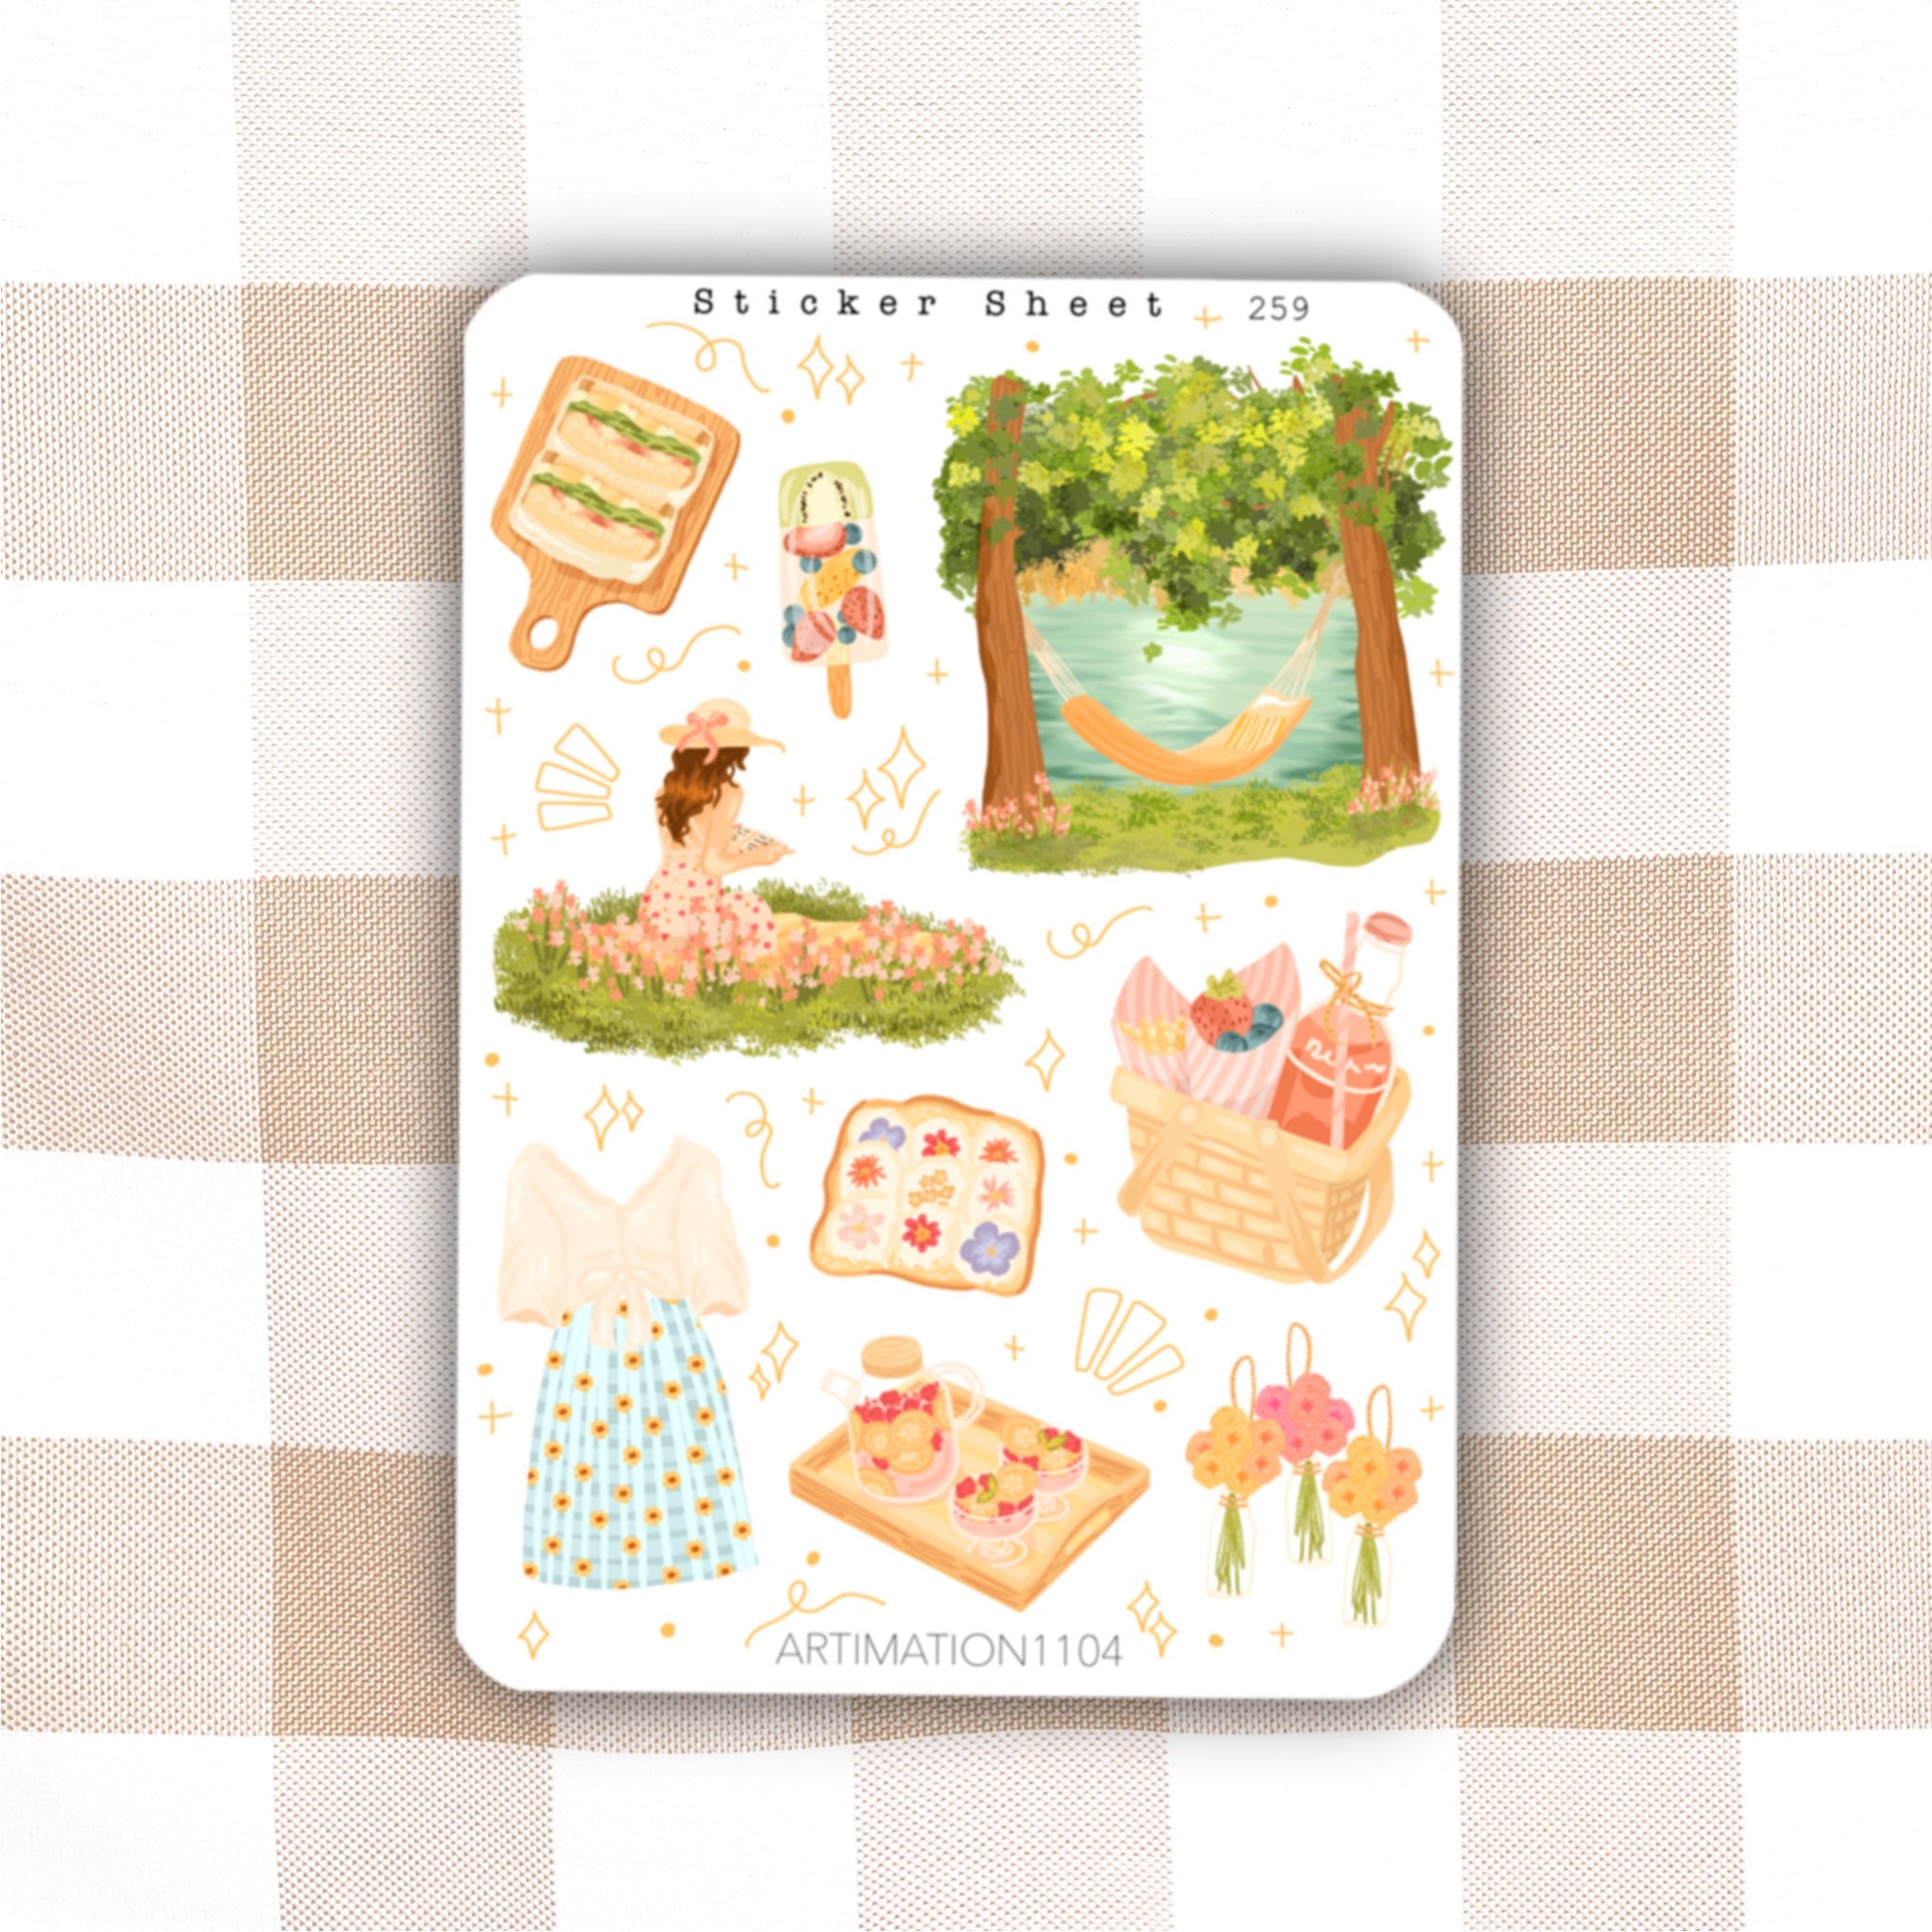 Picnic Mini Sticker Sheet - 3 Designs – together @withkx